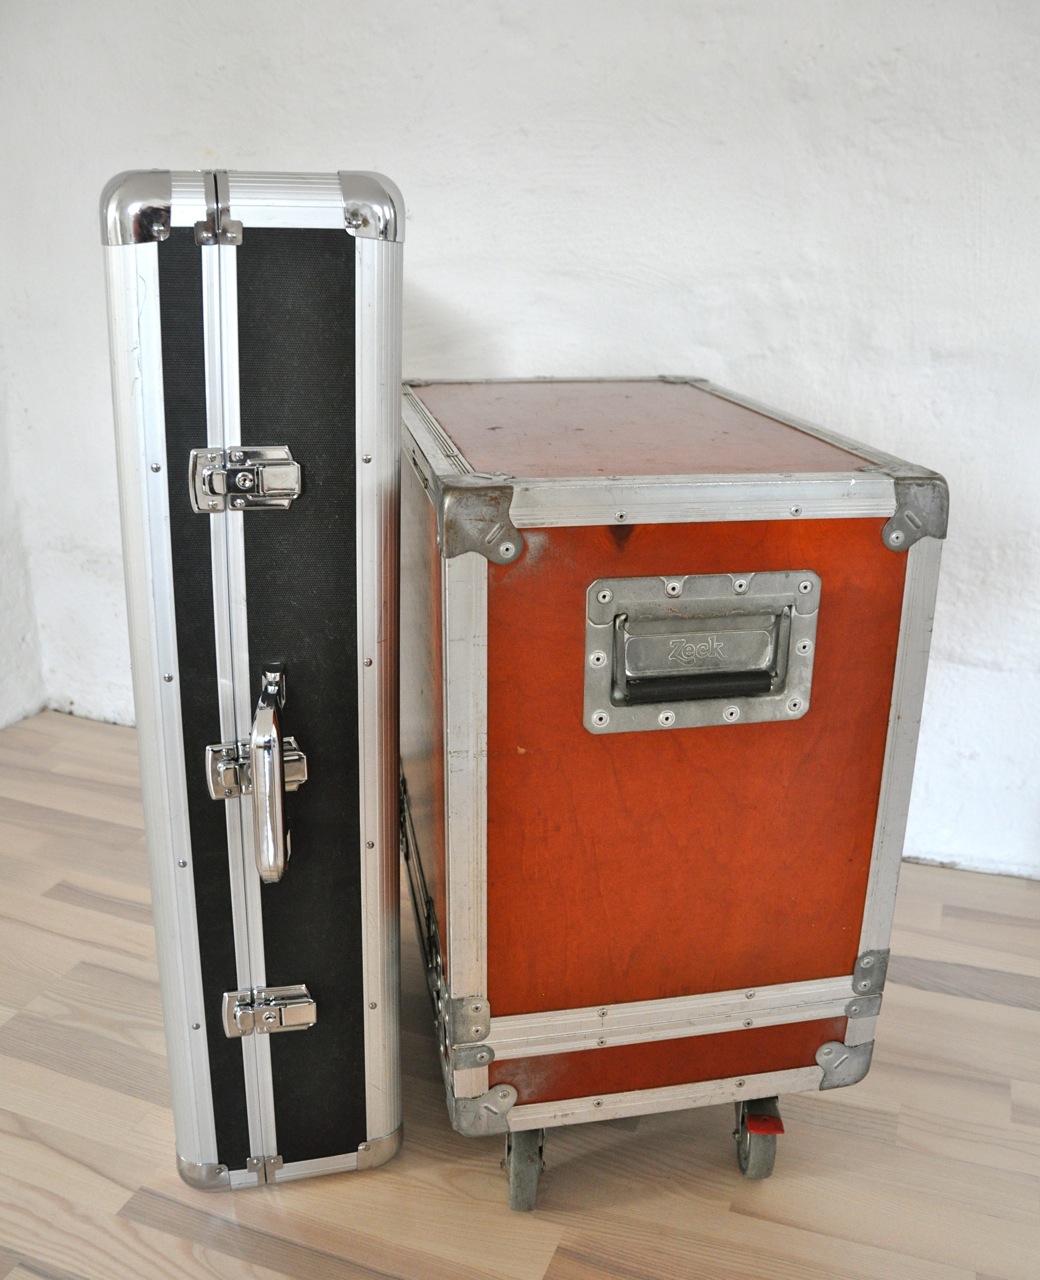 Soren Reiff's board and amped packed in flightcases